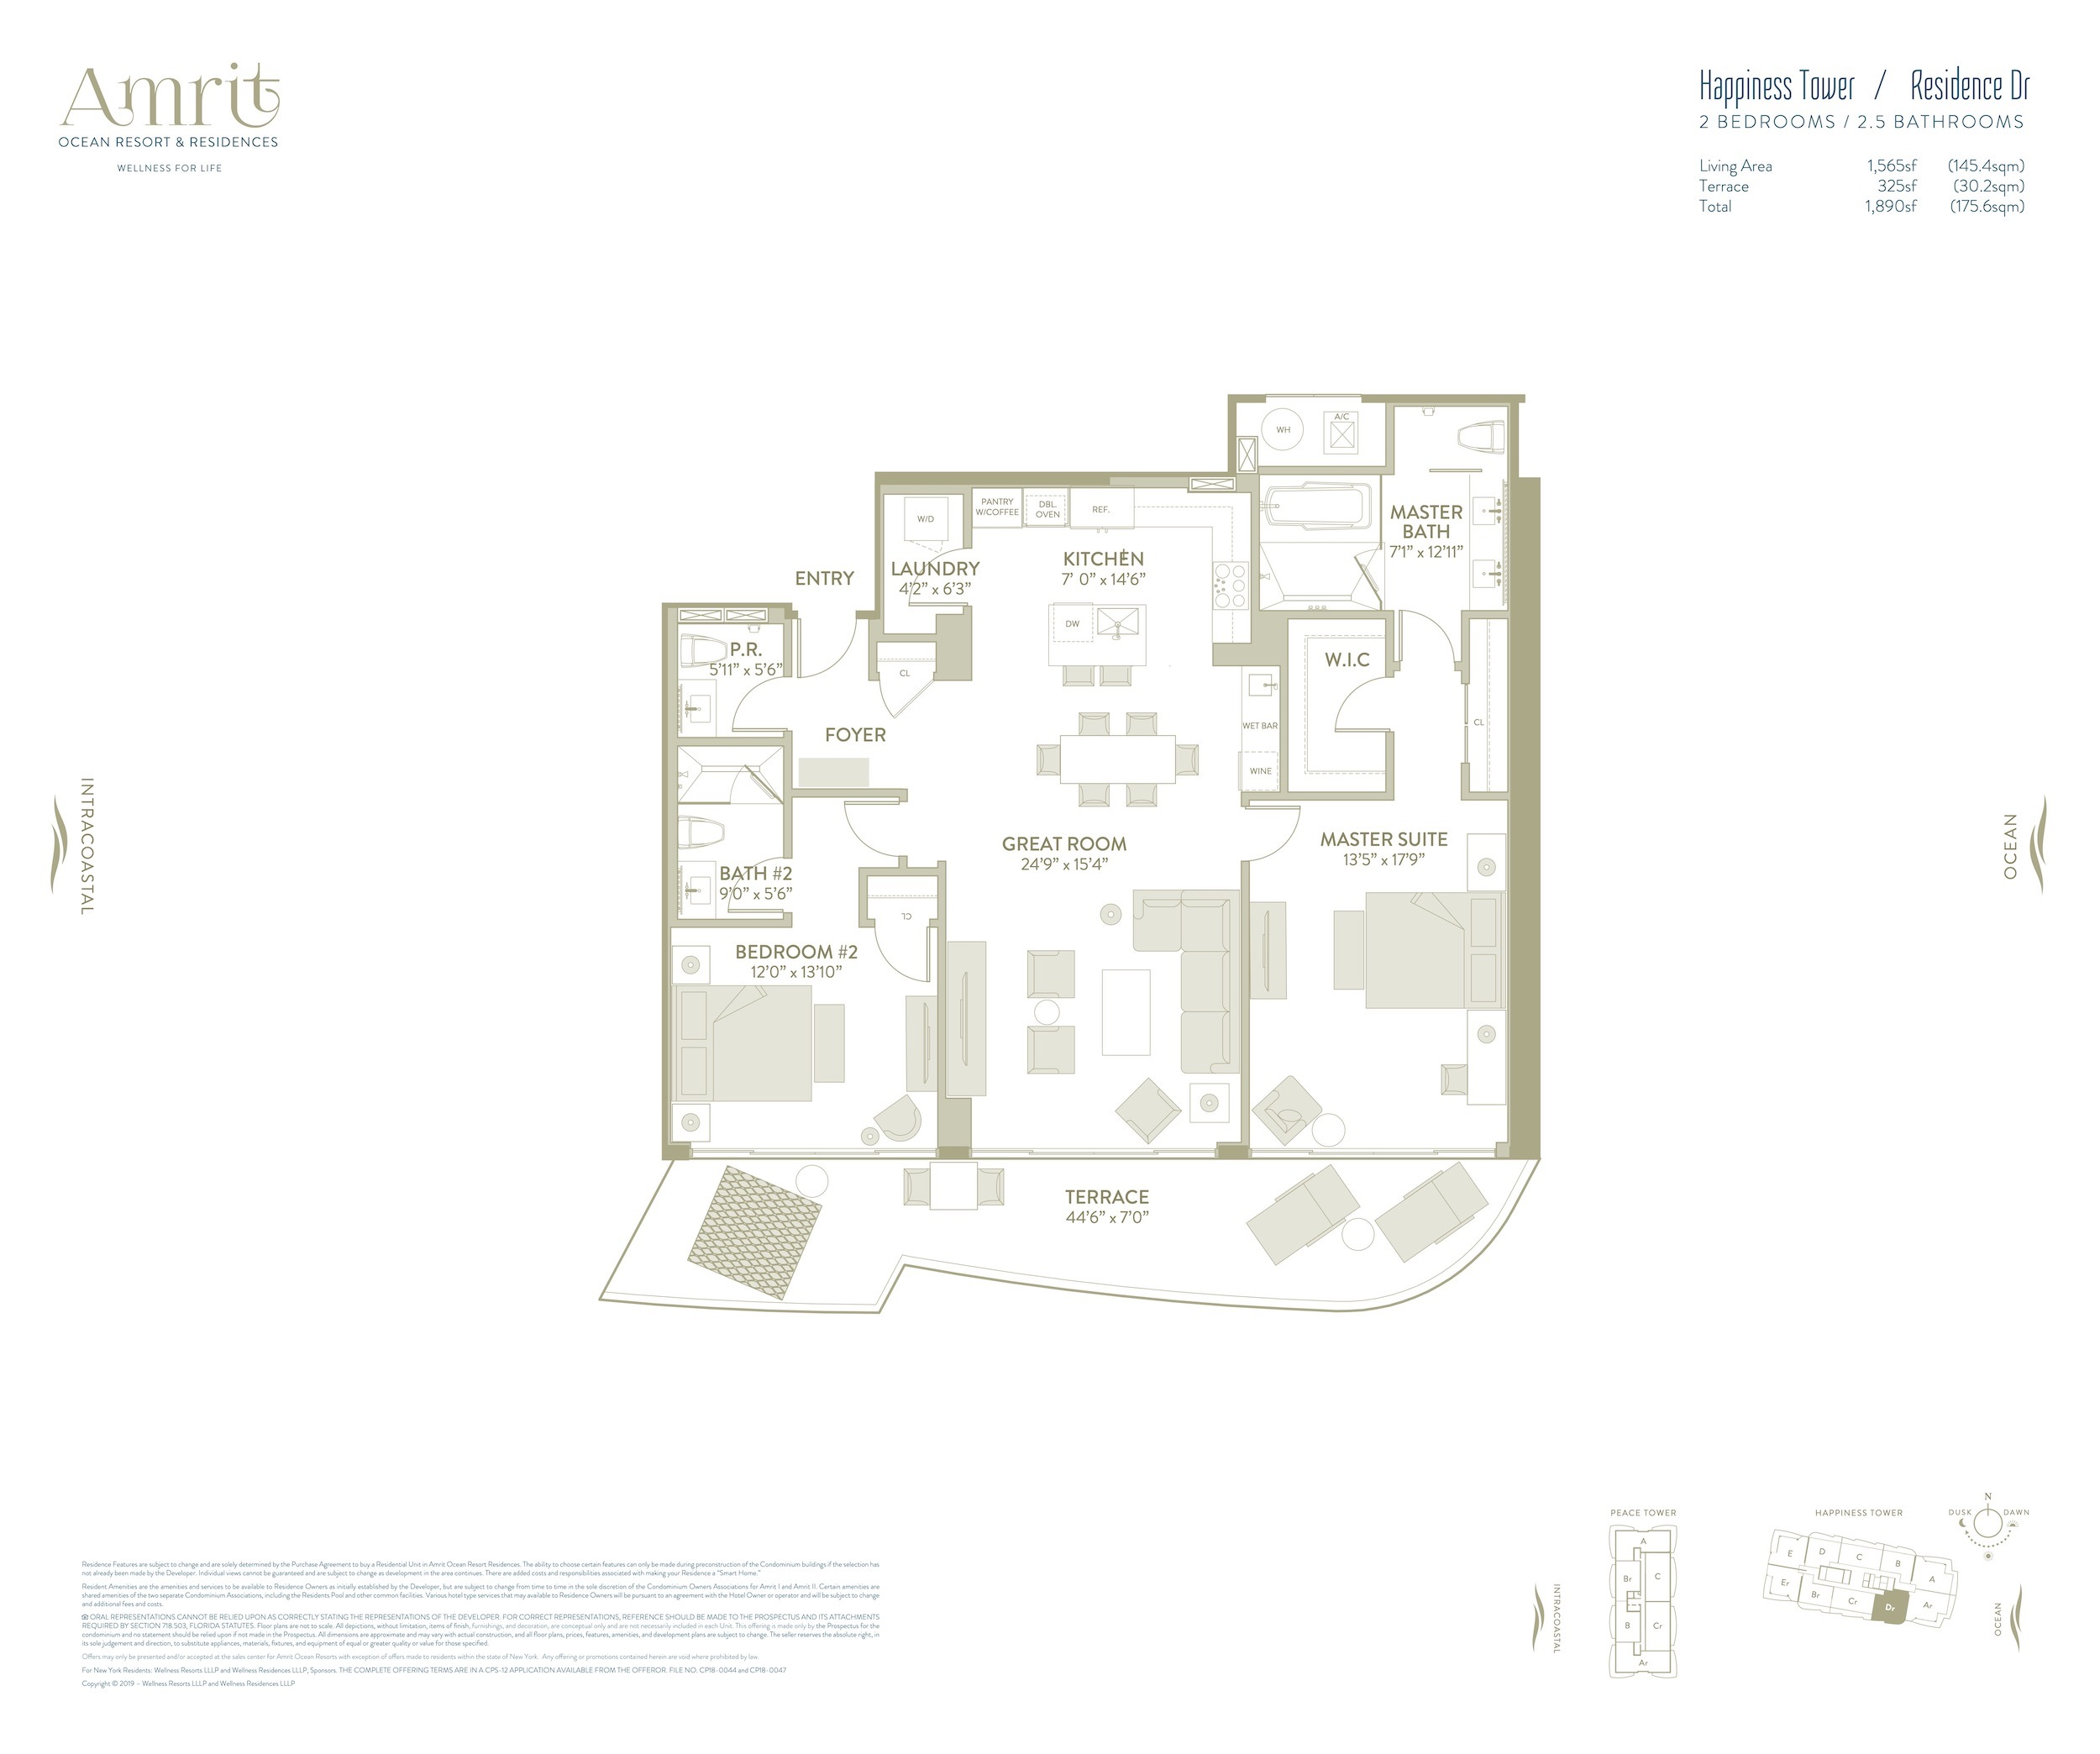 Floor Plan for Amrit Floorplans, Happiness Tower Residence Dr